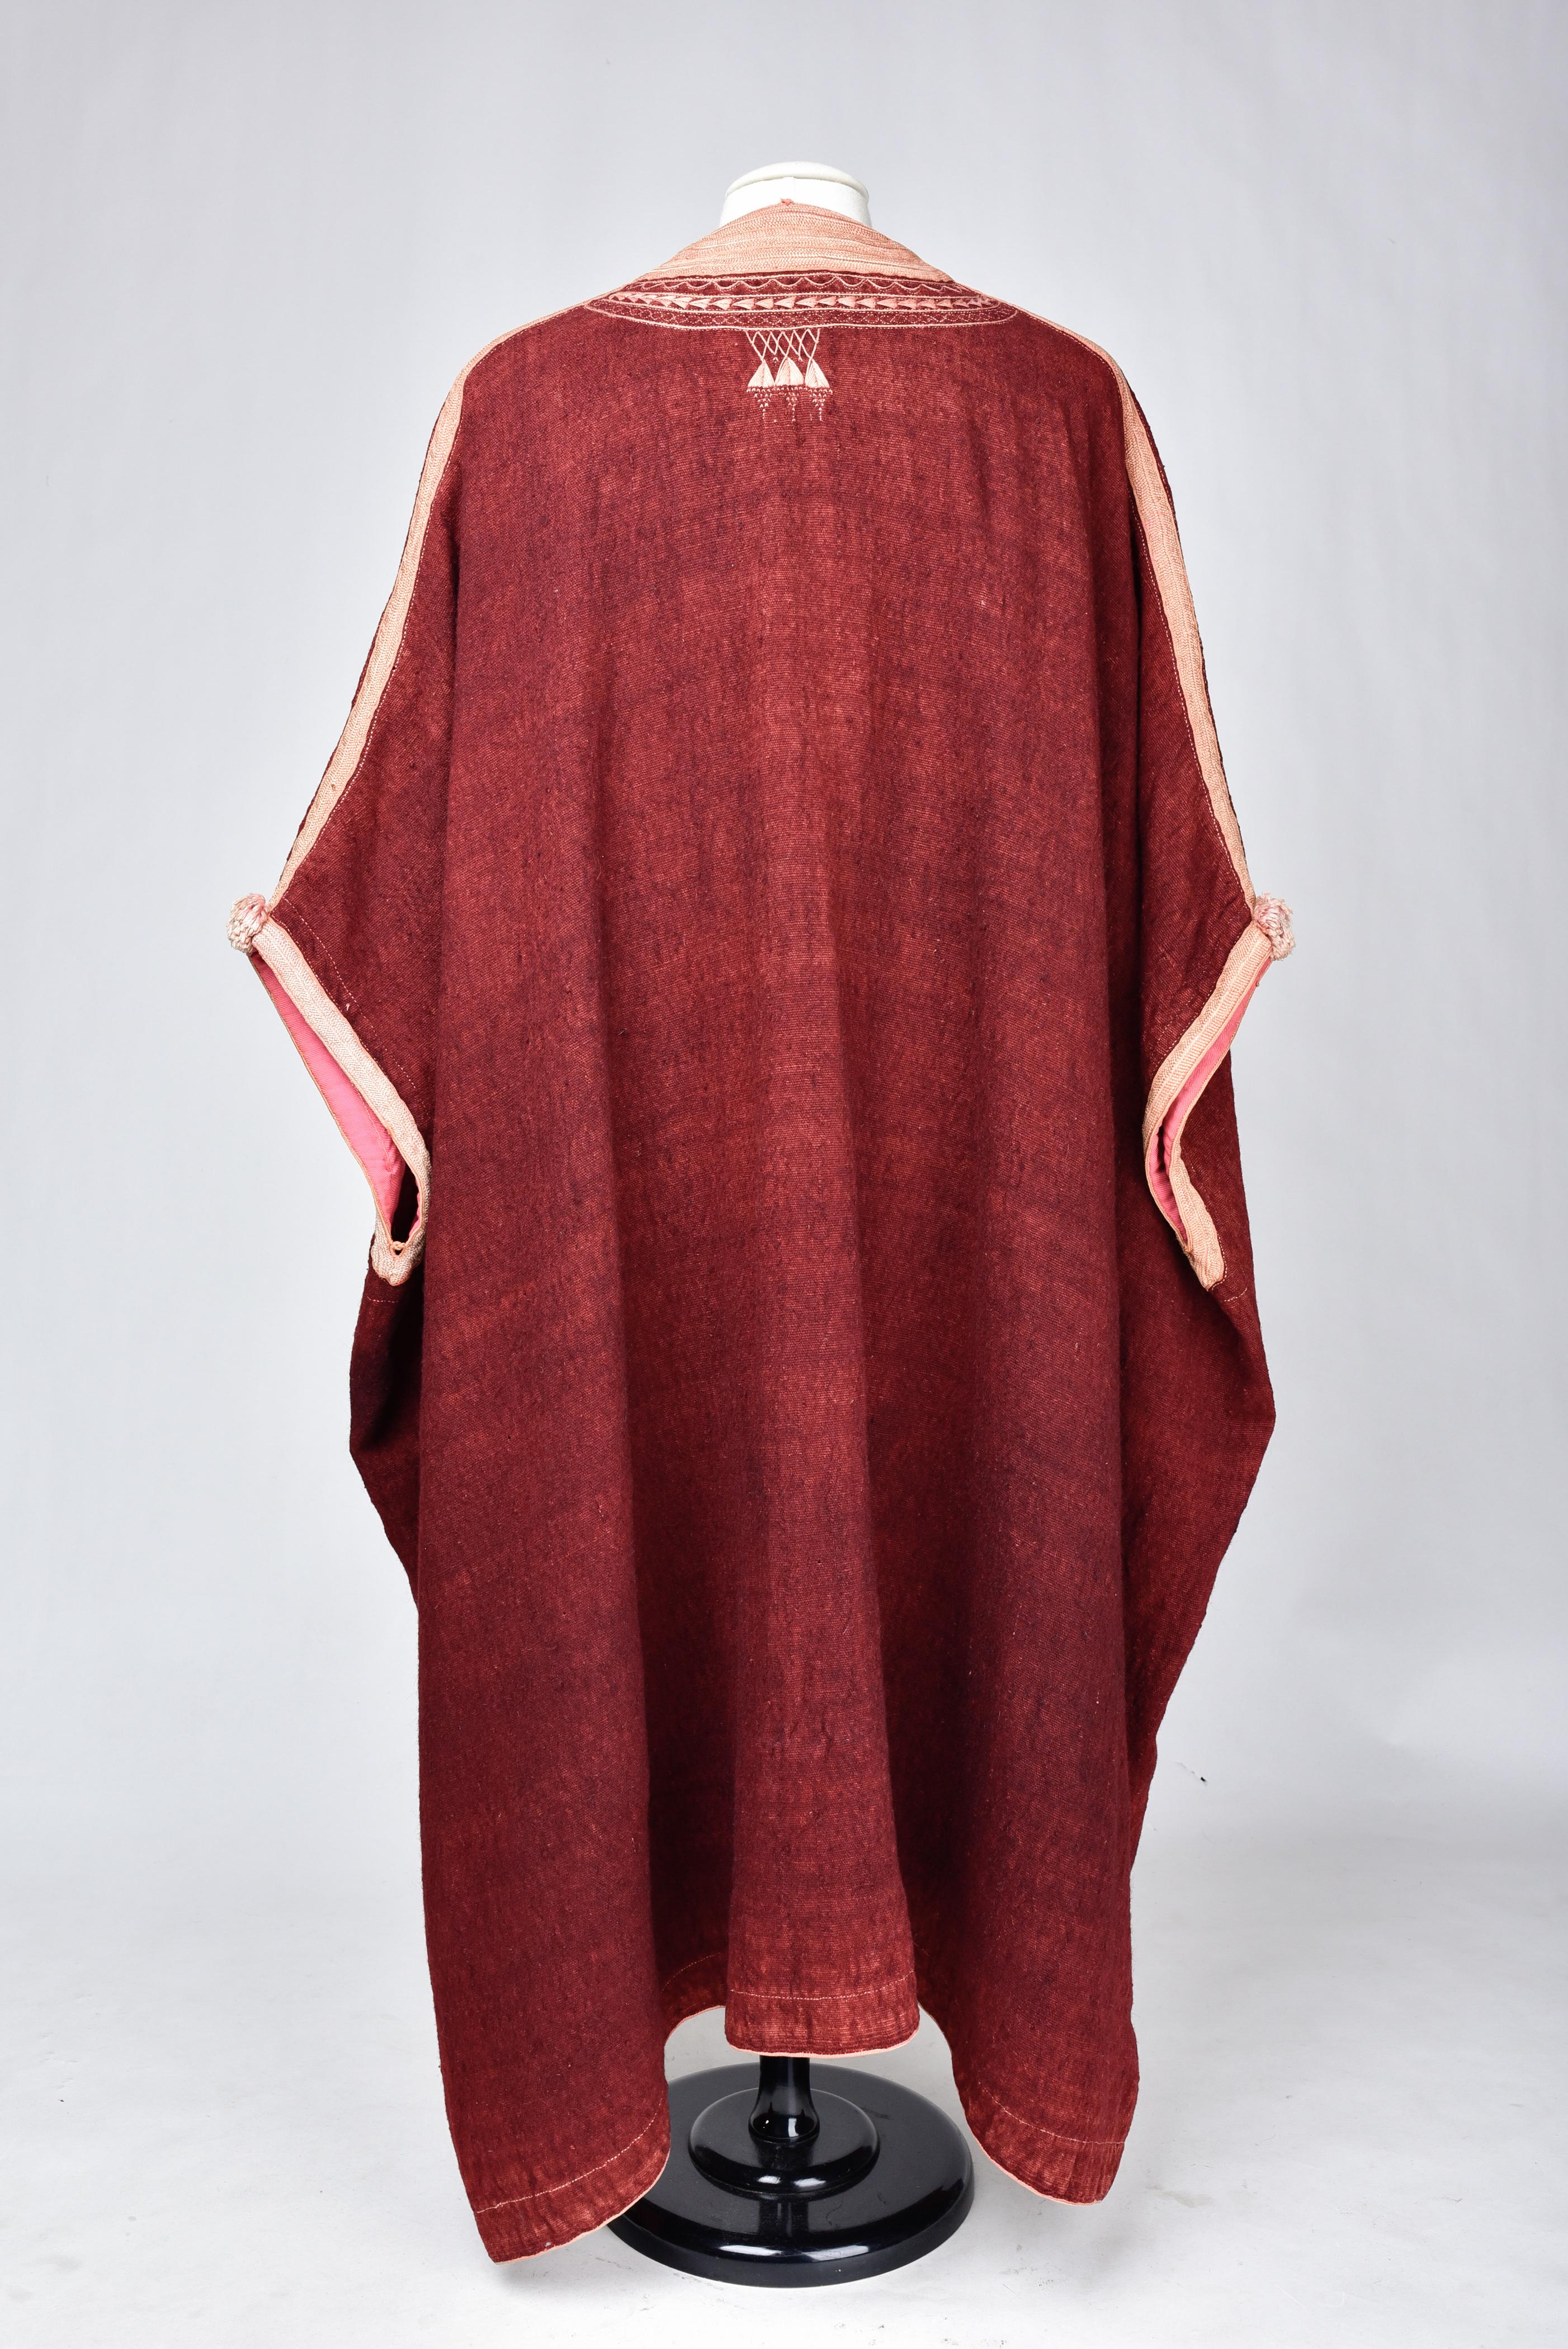 A Berber Djellaba in Dyed Cochineal Embroidered Wool - North Africa Circa 1900 For Sale 8